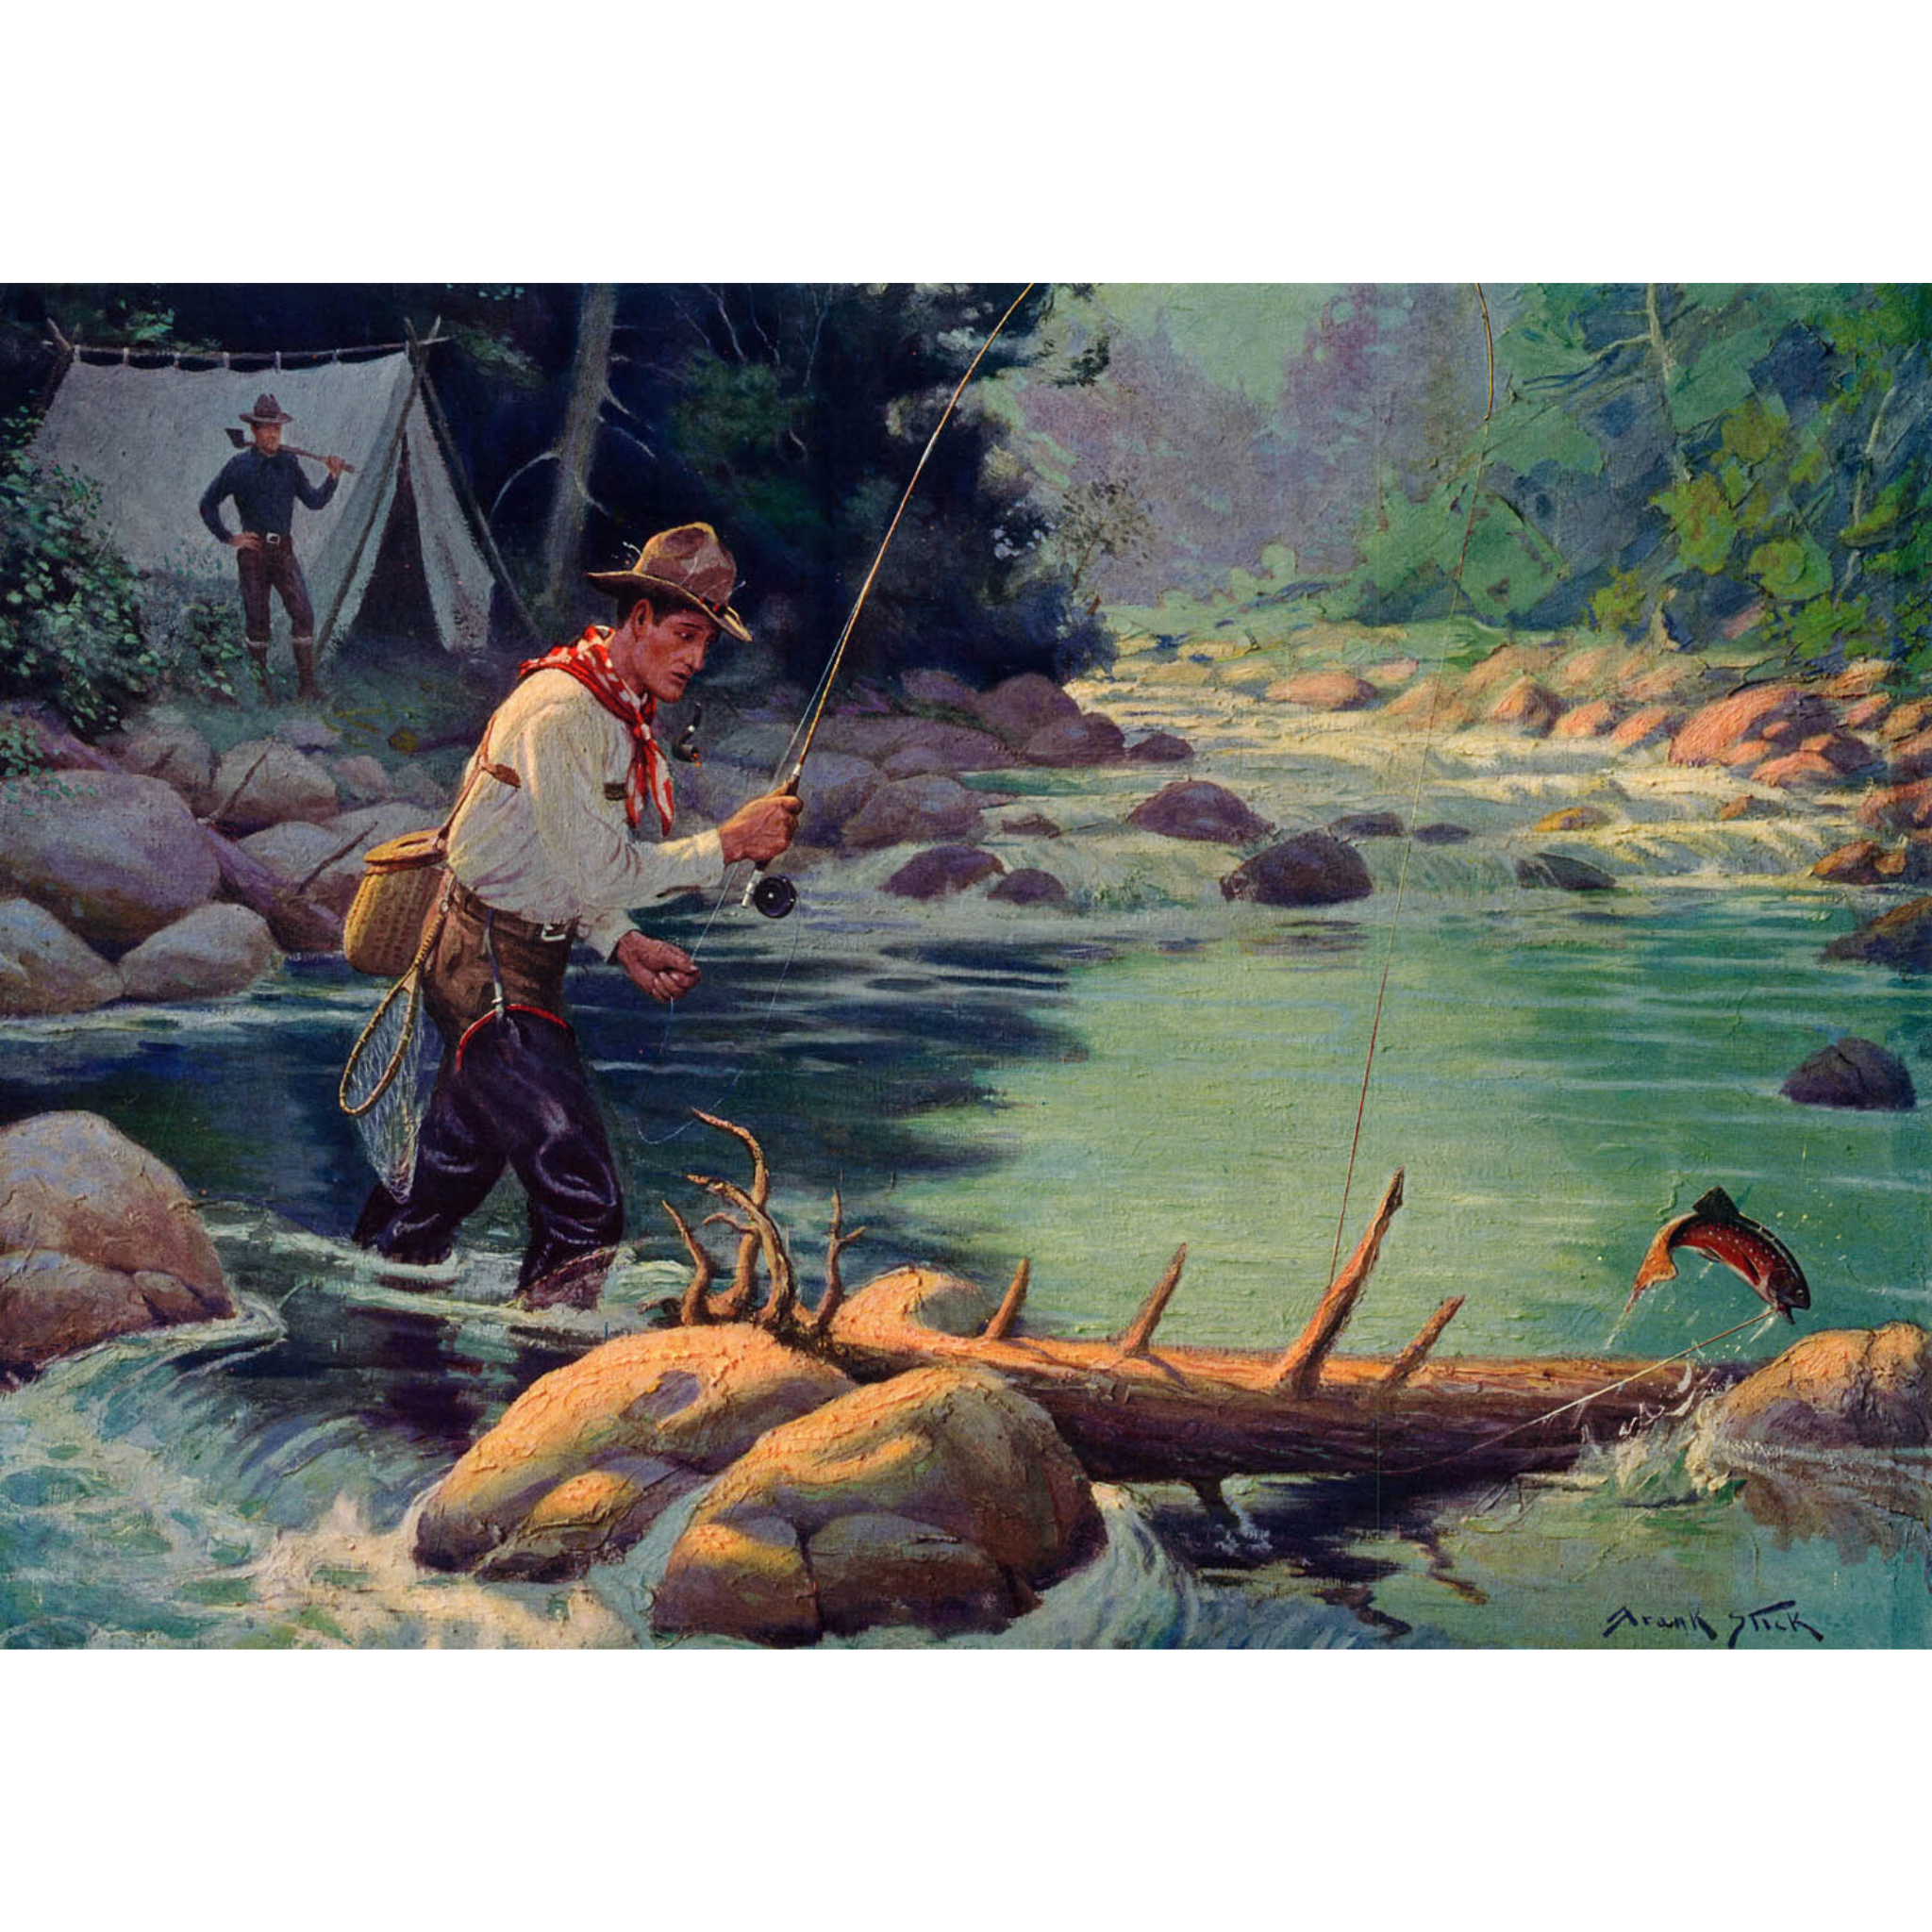 Man Fishing by Camp - ca. 1925 Frank Stick Lithograph